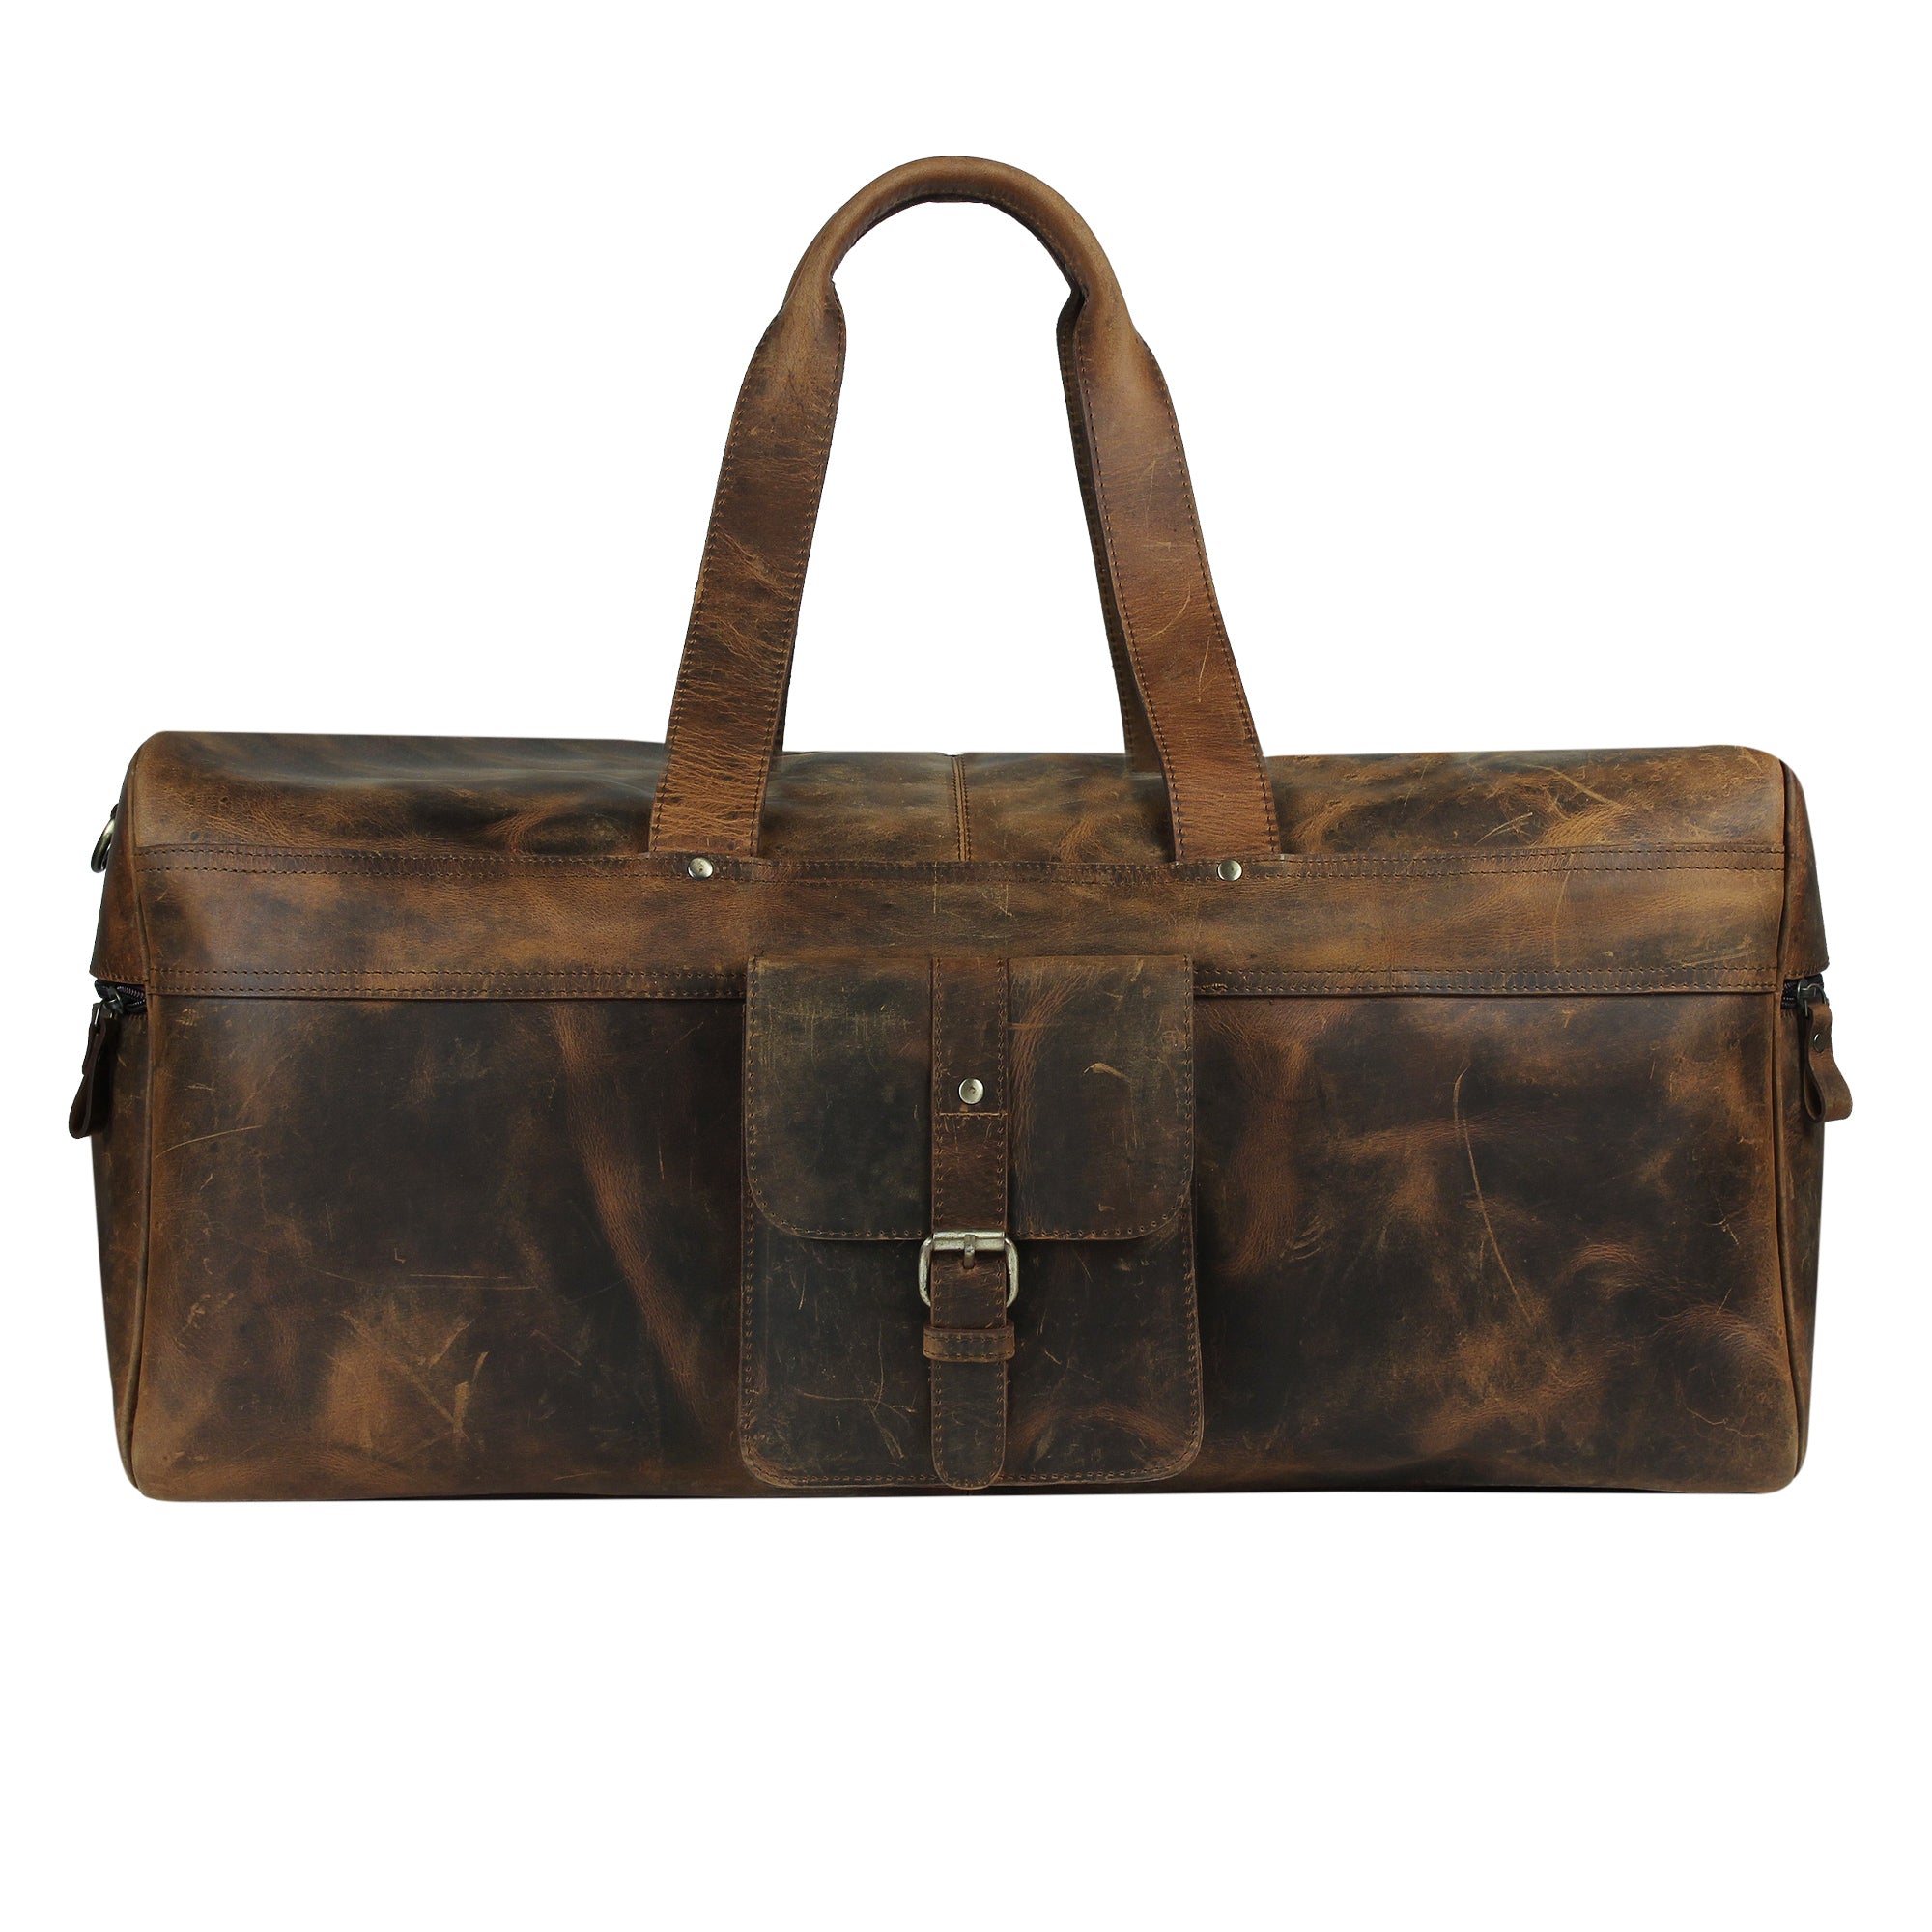 multifeatured leather bag